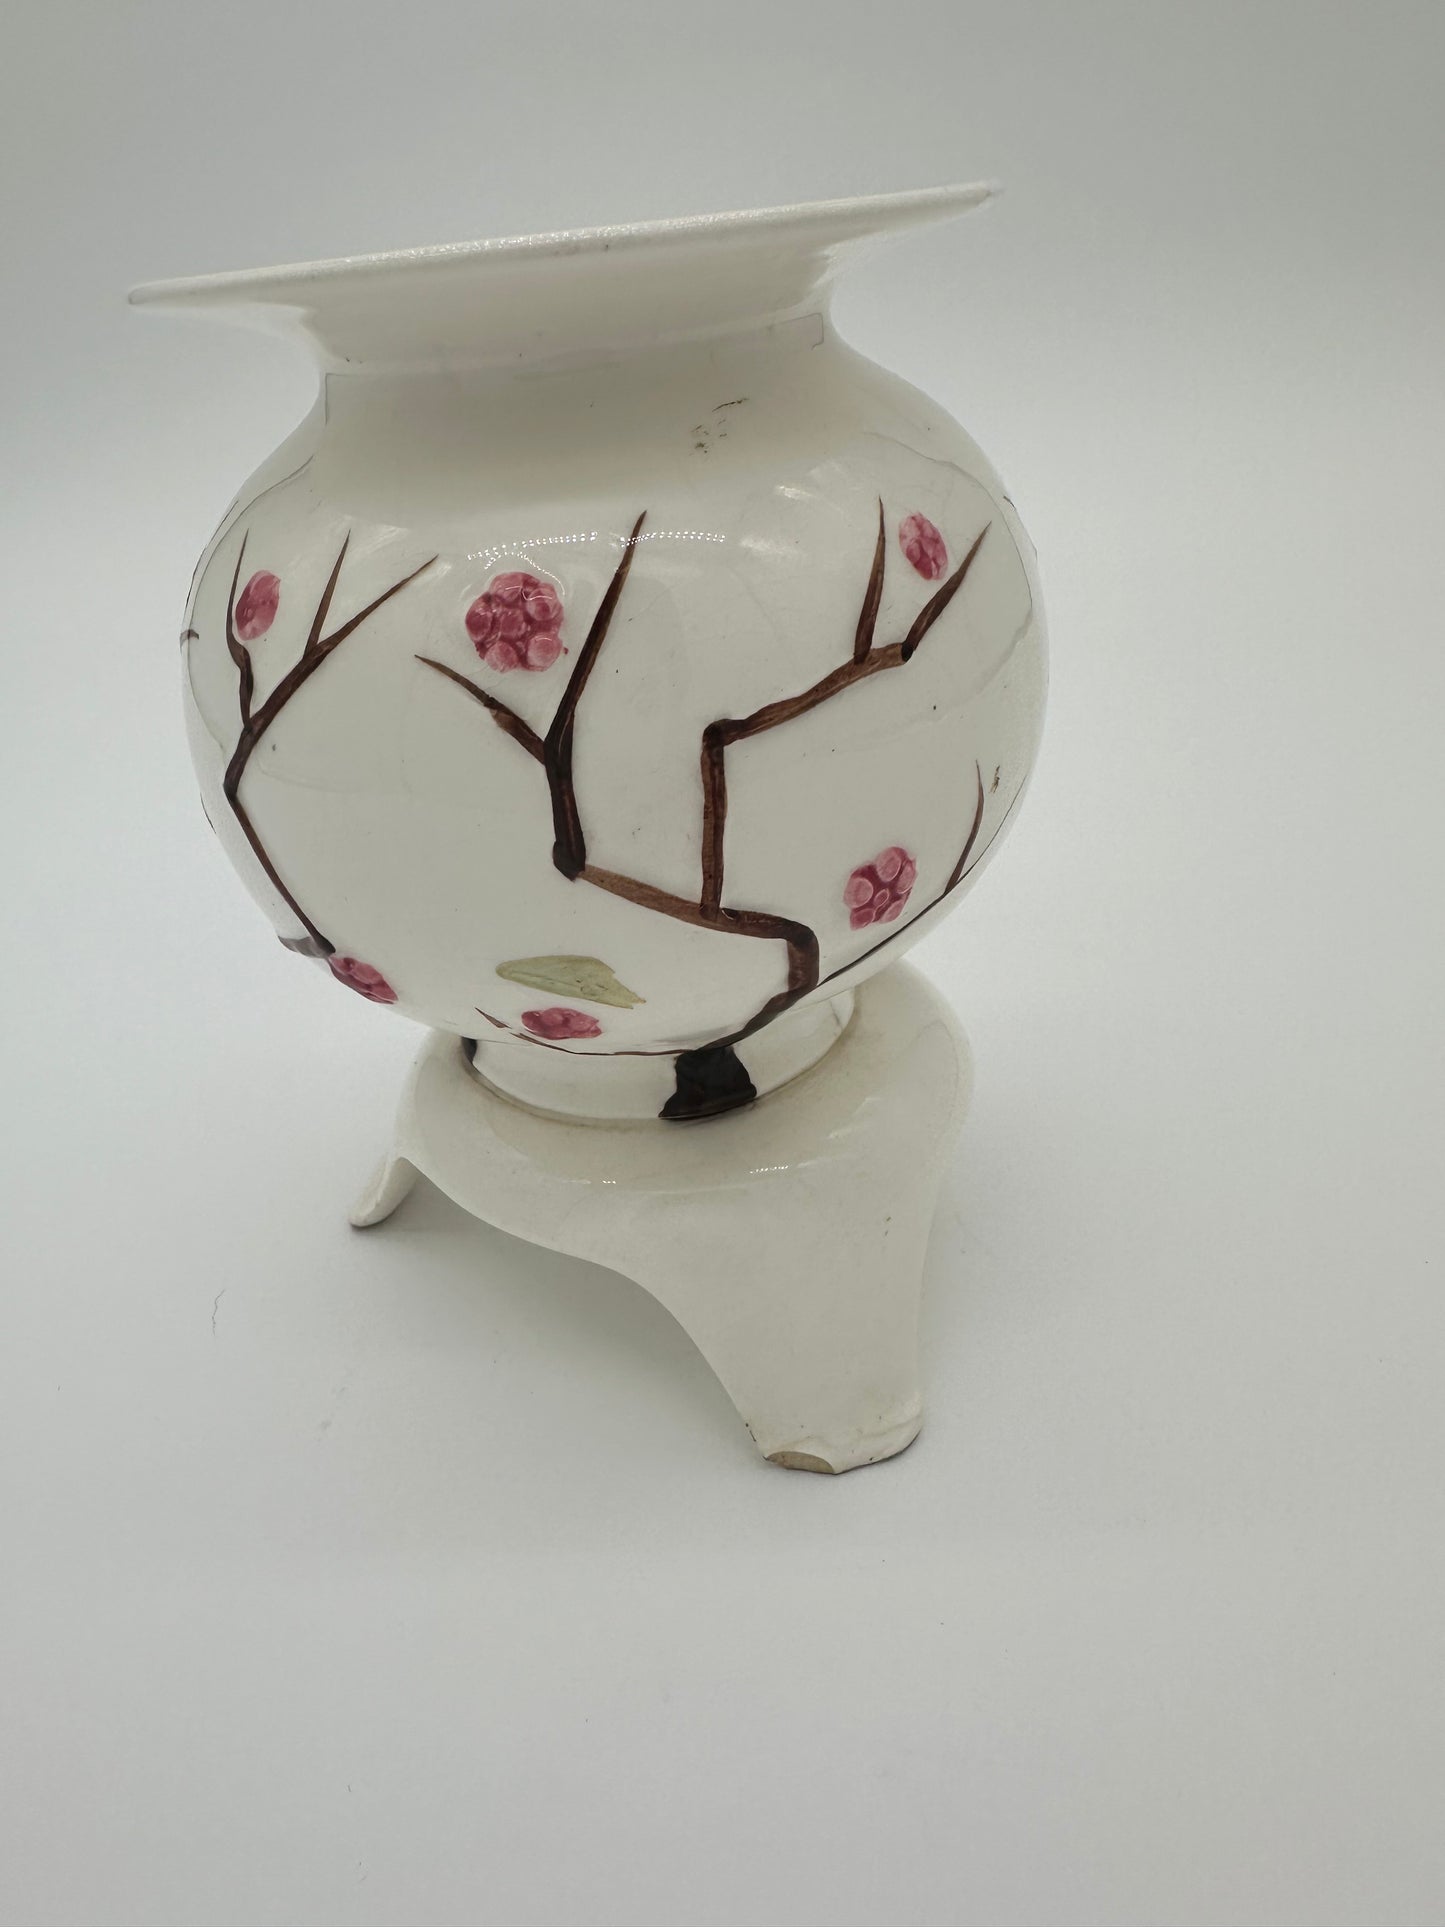 Small Pot or Vase with Flowers